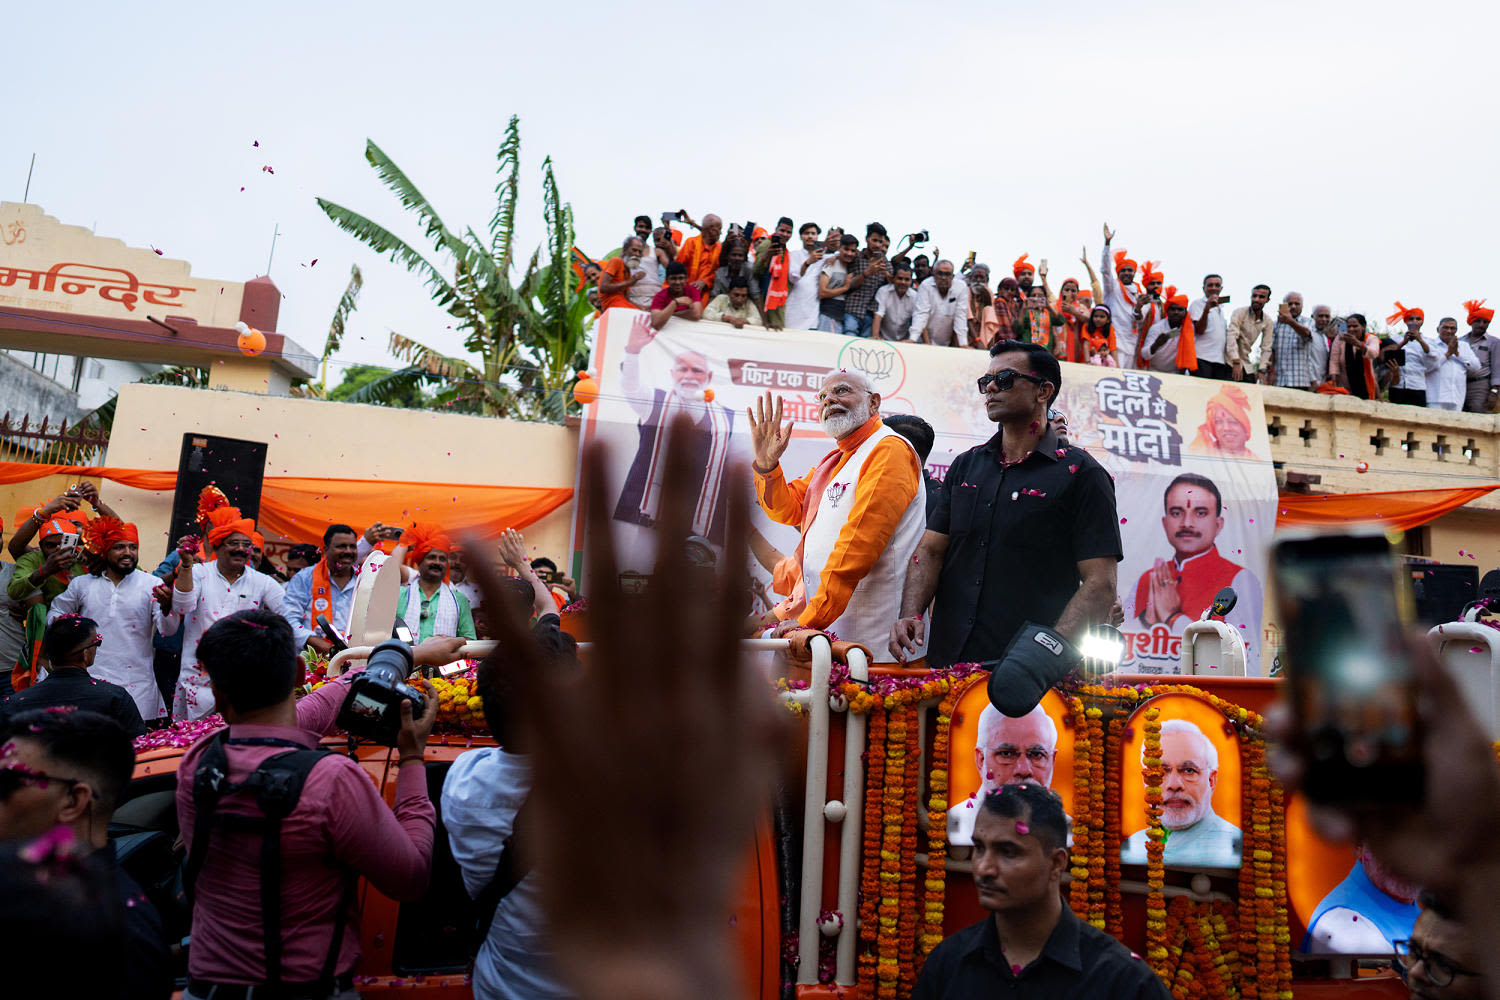 Modi’s alliance has early lead in India election vote count